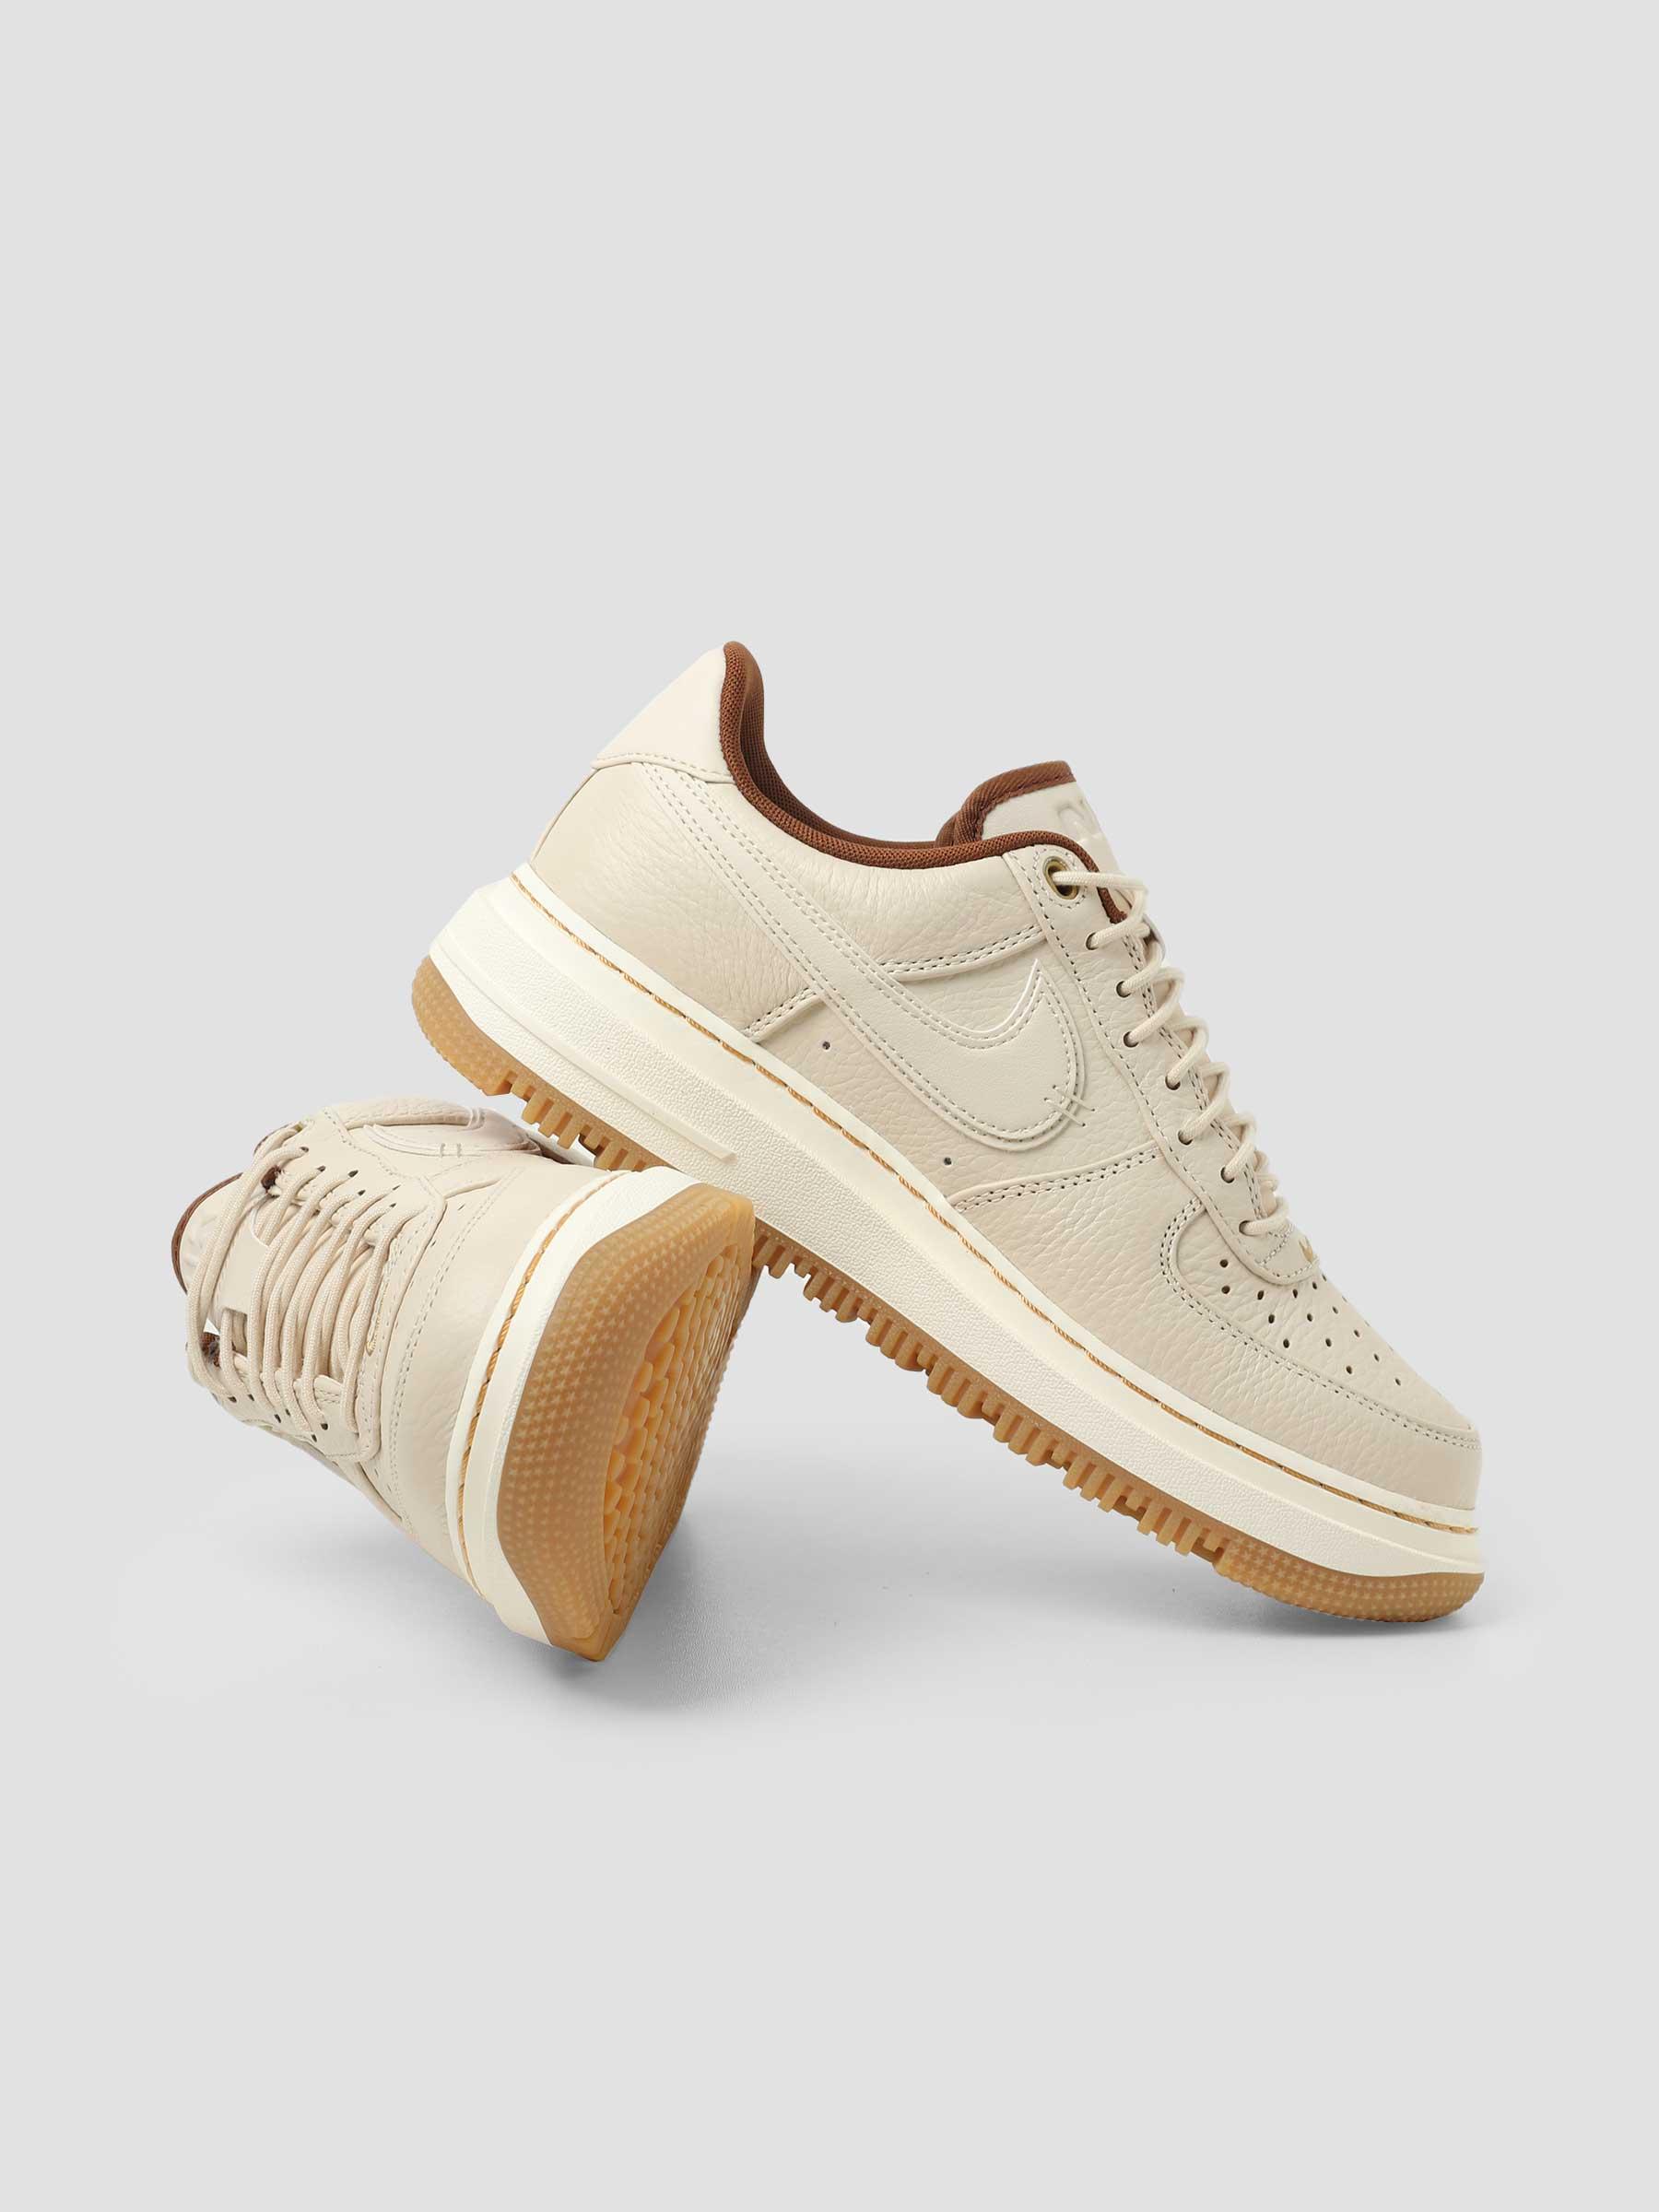 Air Force 1 Luxe Pearl White Pale Ivory Pecan Gum Yellow DB4109-200